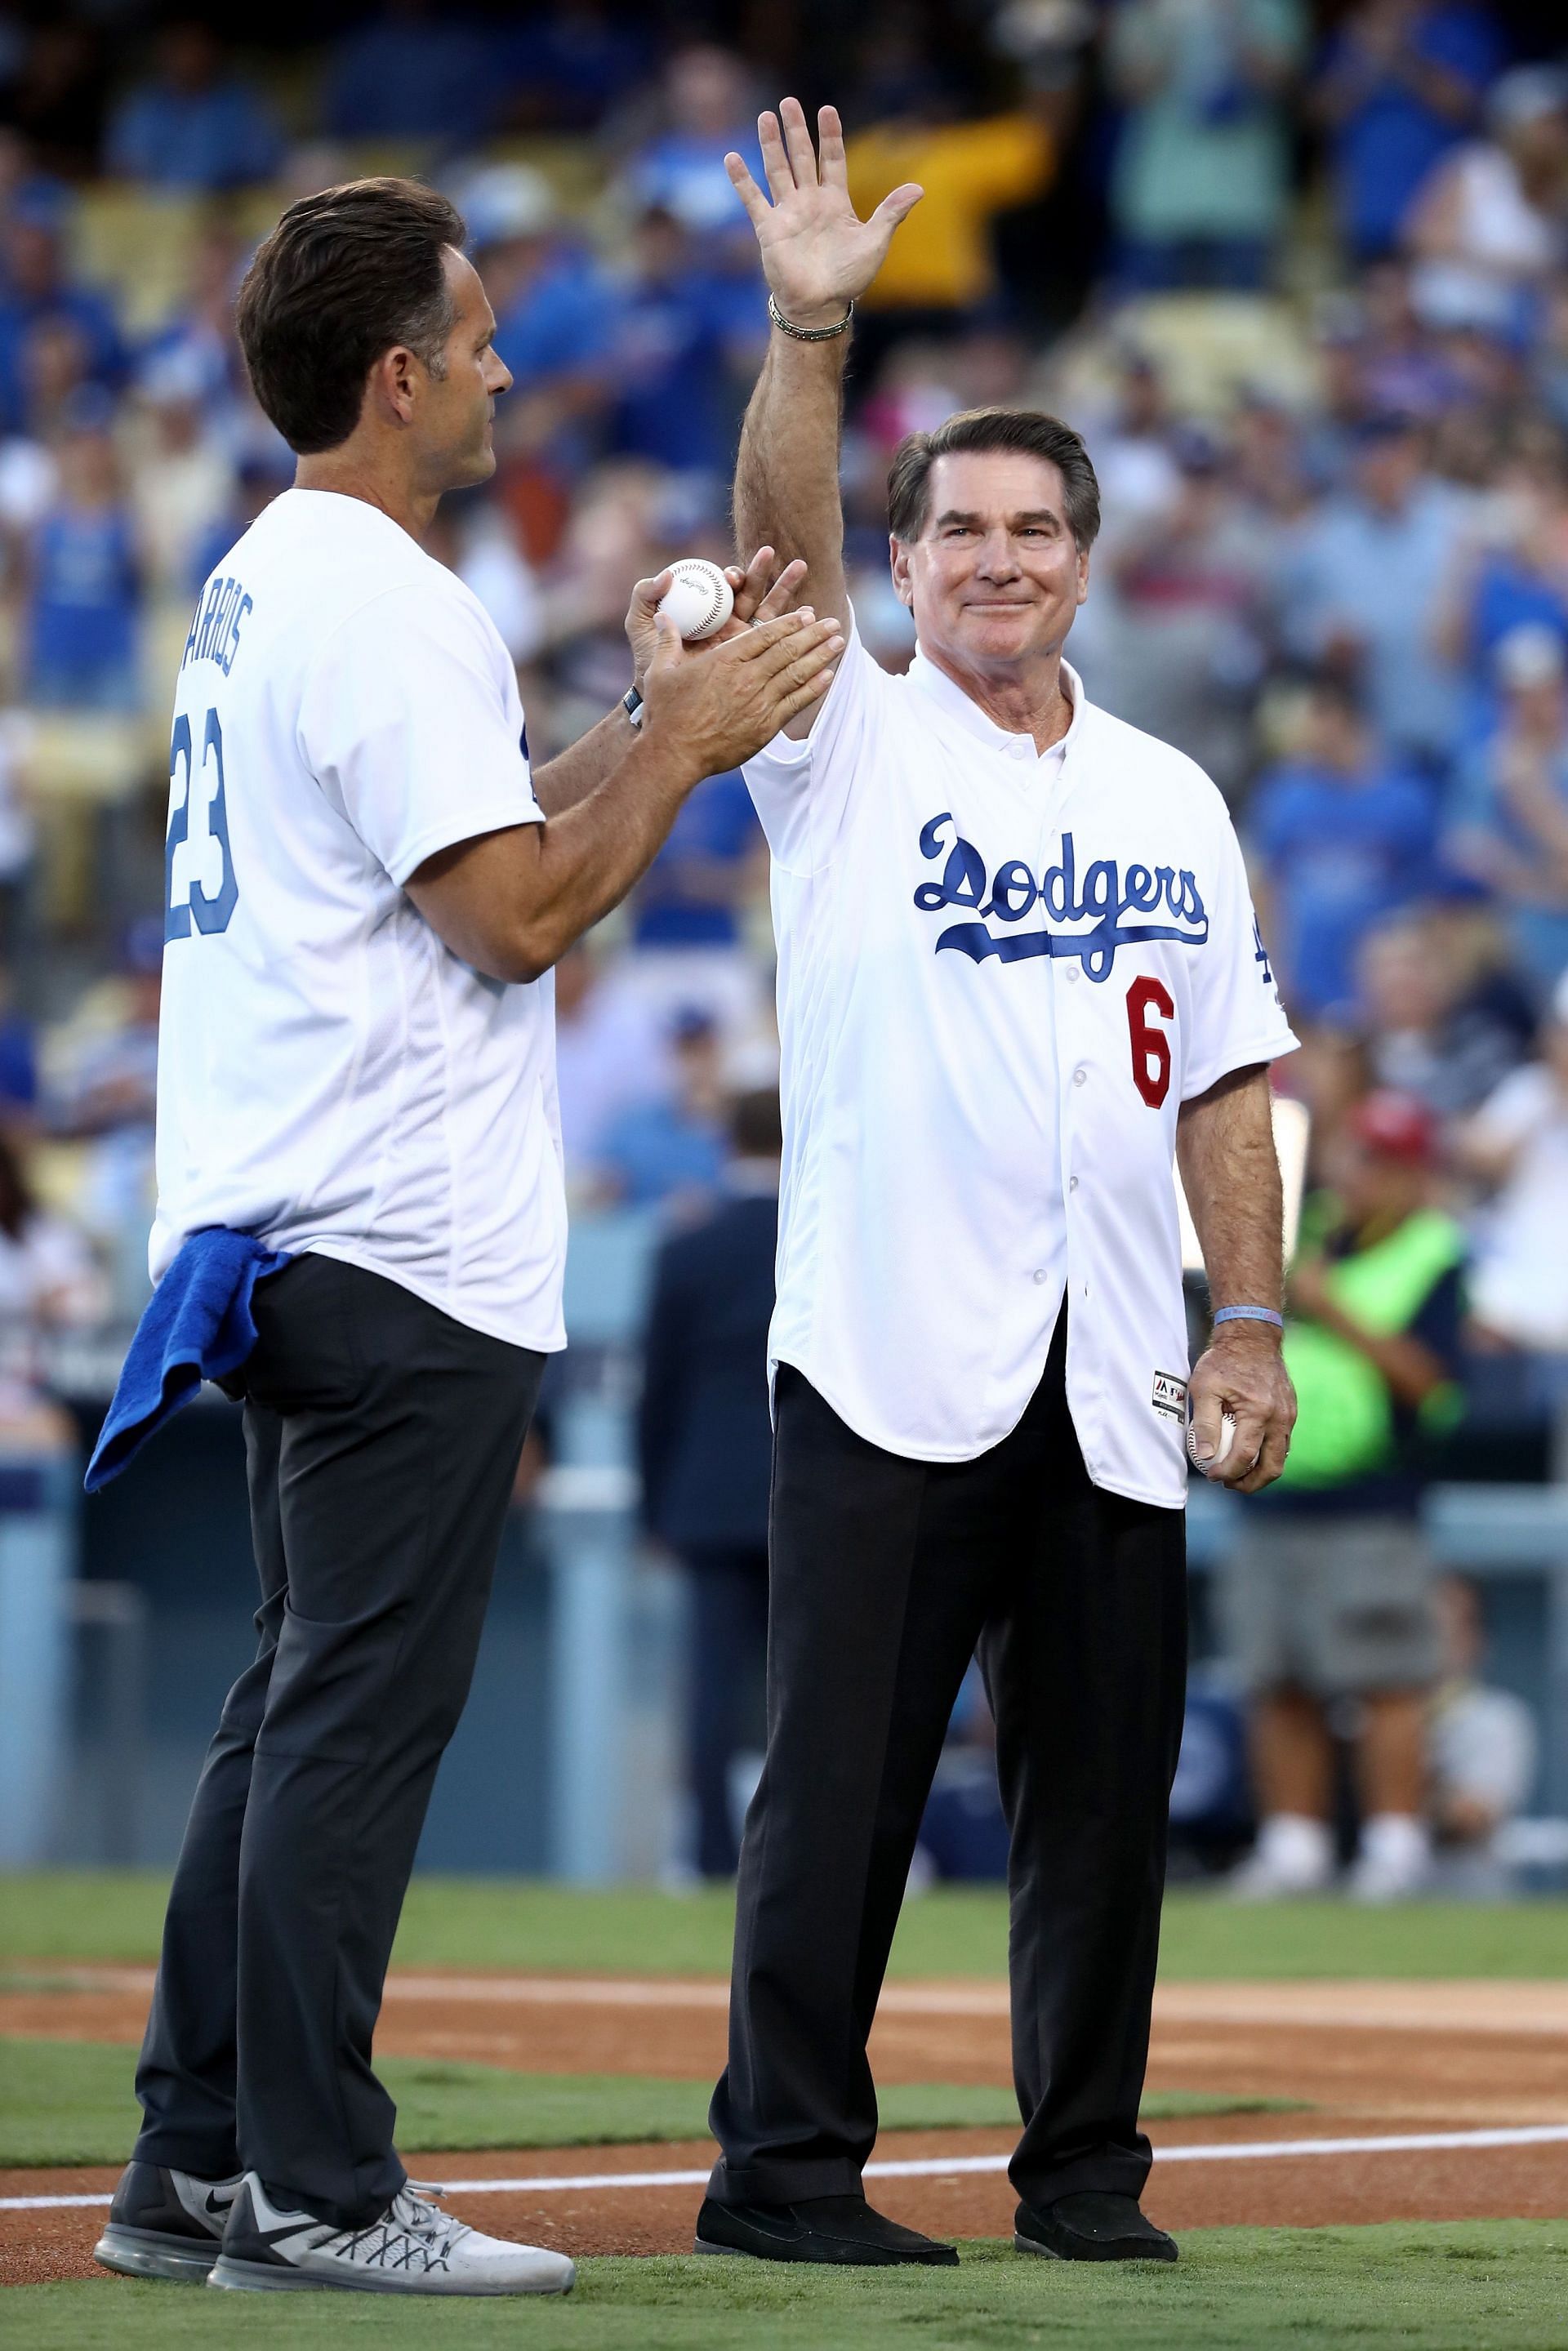 Sons of Steve Garvey: The Slappy McPopup Era Comes To A Close in LA